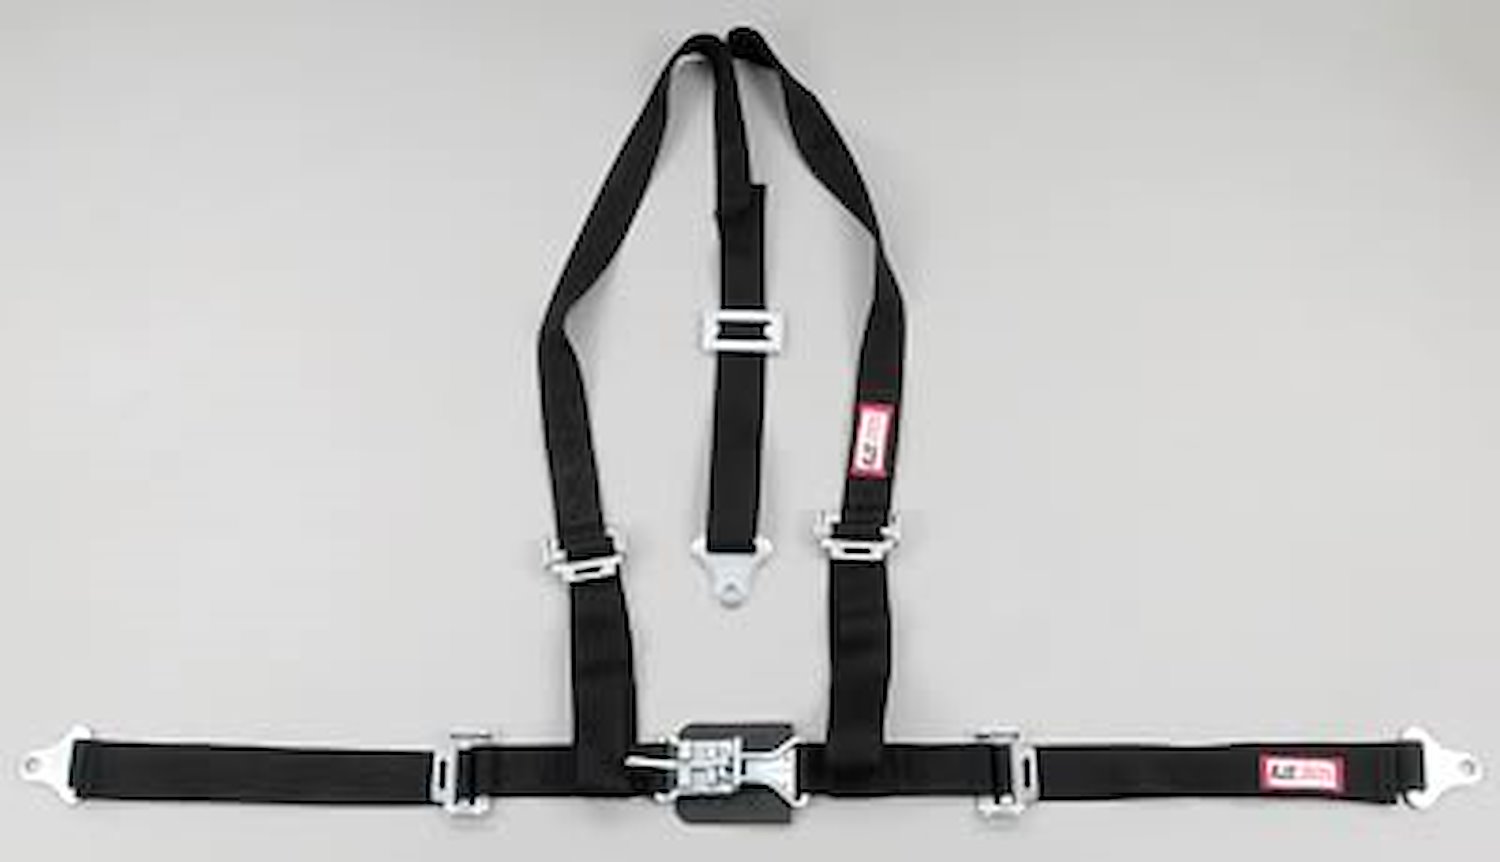 NON-SFI L&L HARNESS 3 PULL UP Lap BELT SNAP SEWN IN 2 S.H. Y FLOOR Mount w/STERNUM STRAP WRAP/BOLT YELLOW